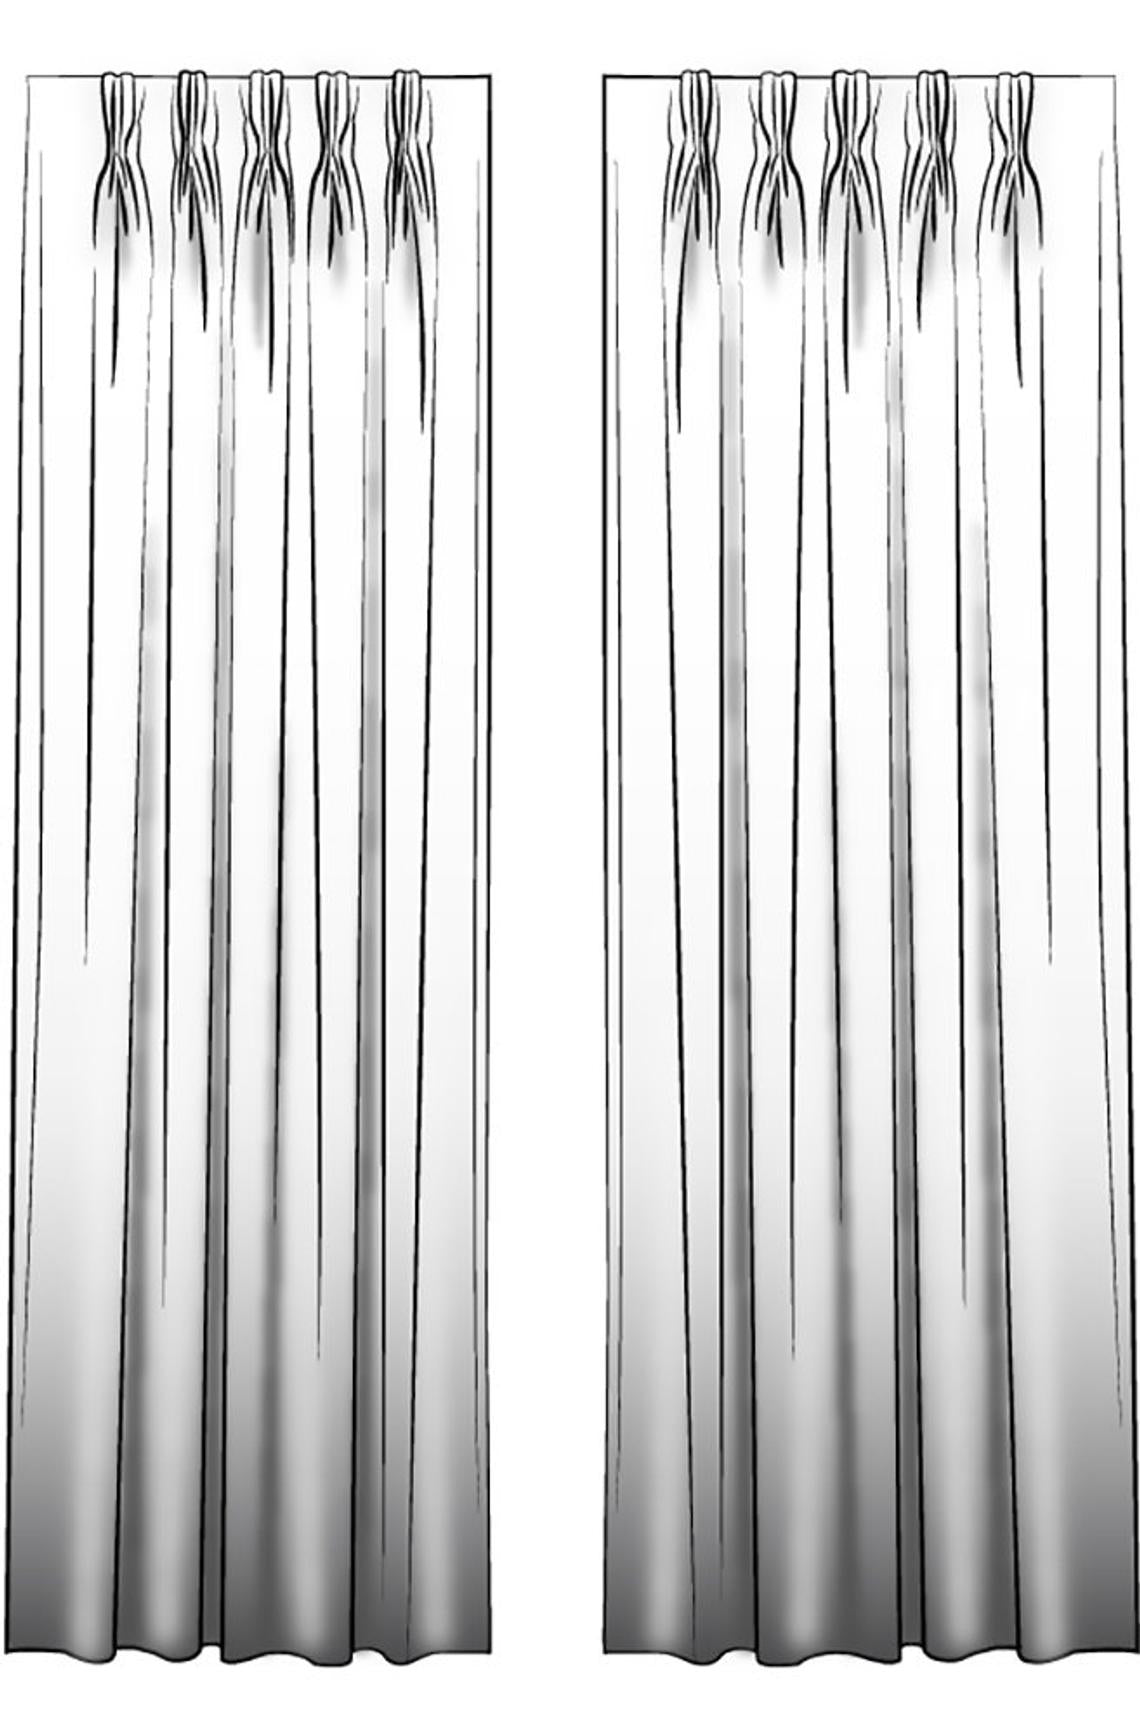 pinch pleated curtain panels pair in classic storm gray ticking stripe on white